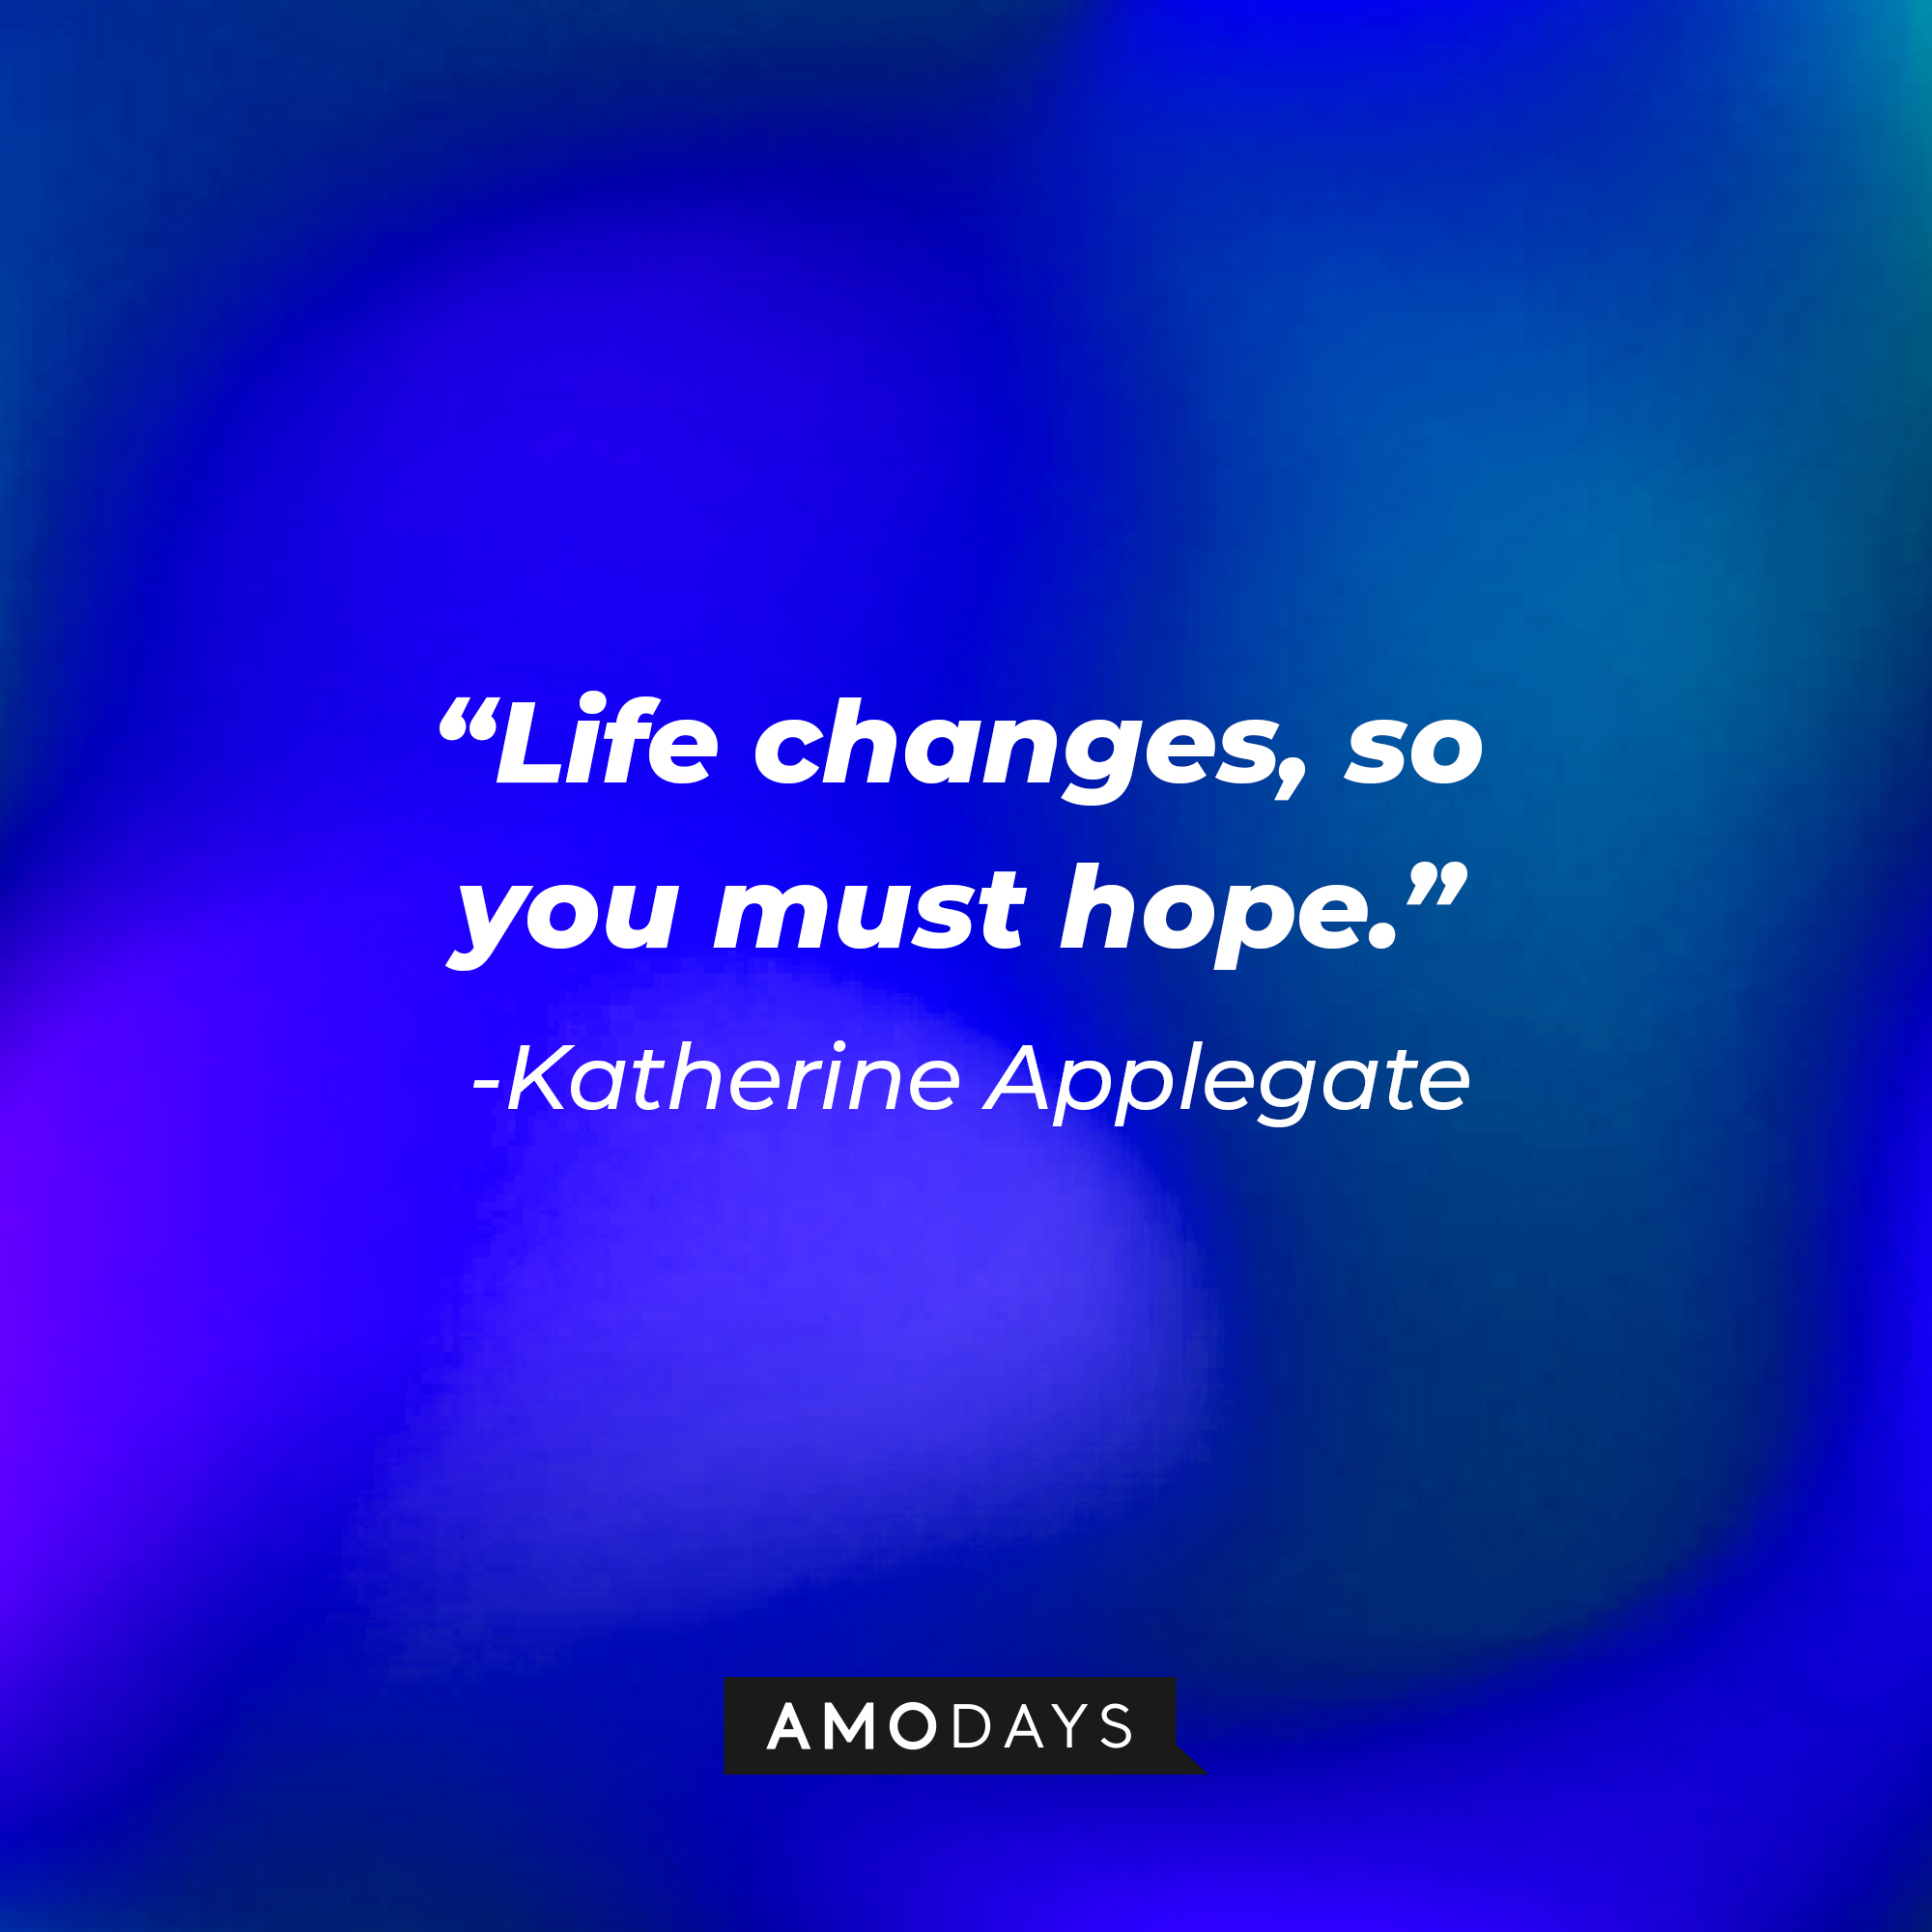 Katherine Applegate’s quote: "Life changes, so you must hope."  | Image: Amodays